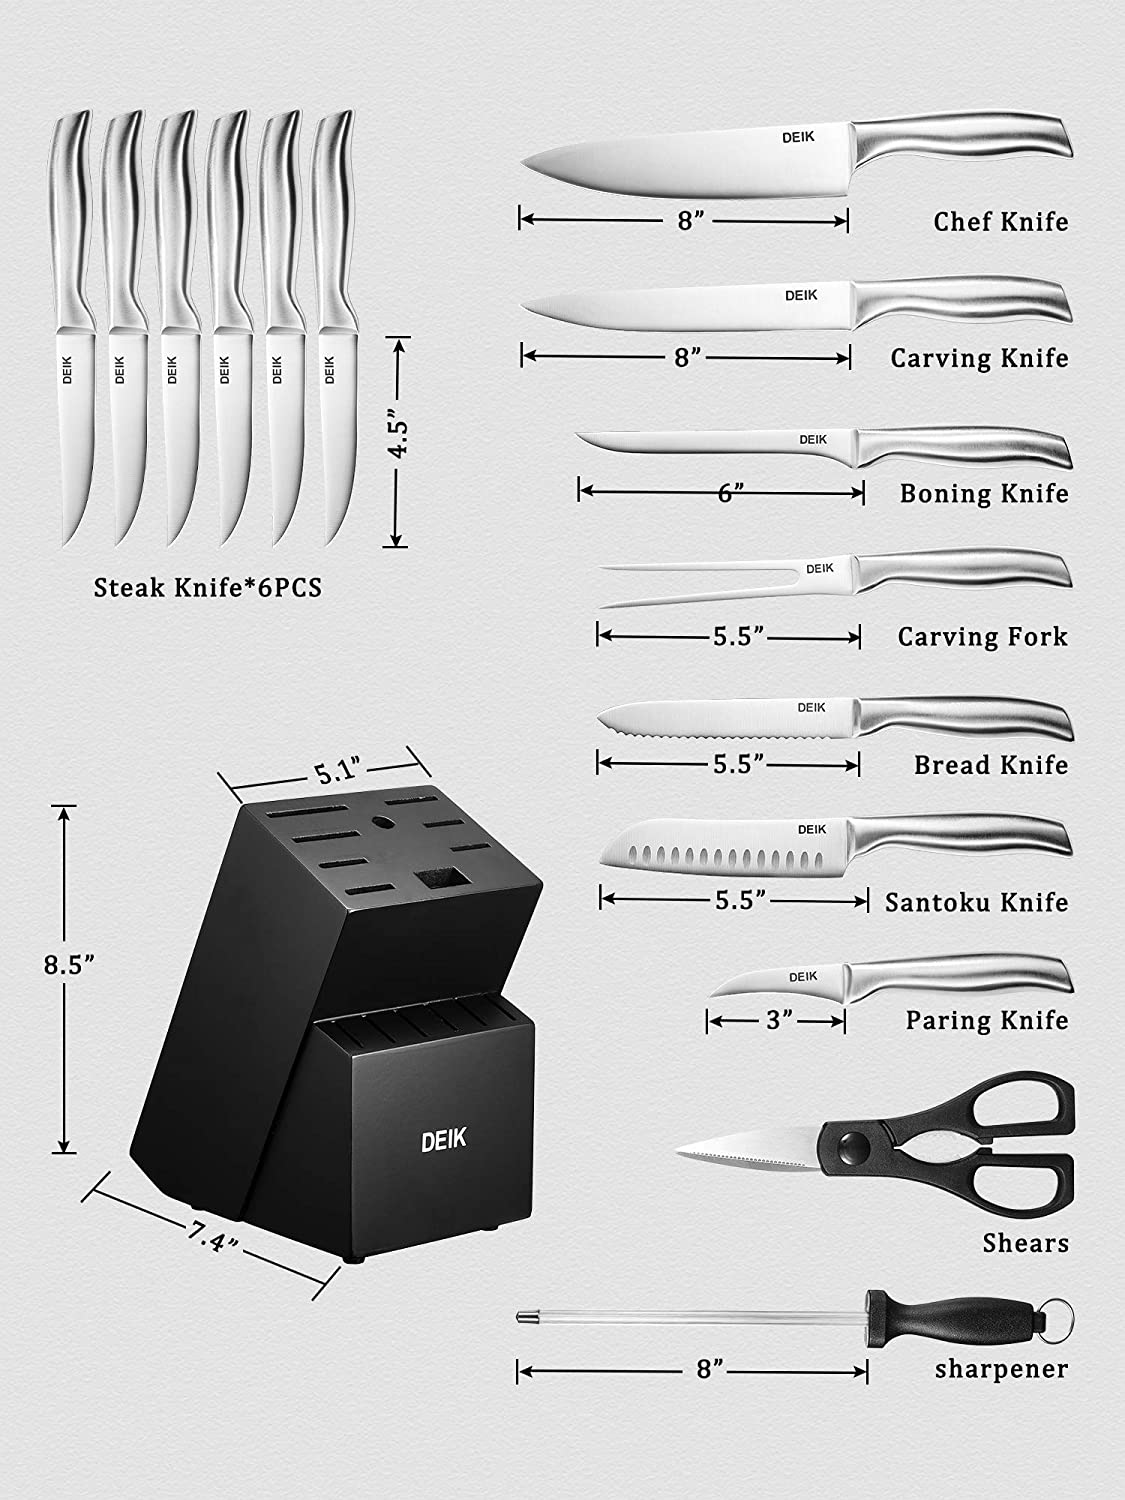 Deik Knife Set, 16-Piece Kitchen Knife Set with Wood Block, Manual Sharpening for Chef Knife Set, Stainless Steel Hollow Handle Block Set, Knife Tools